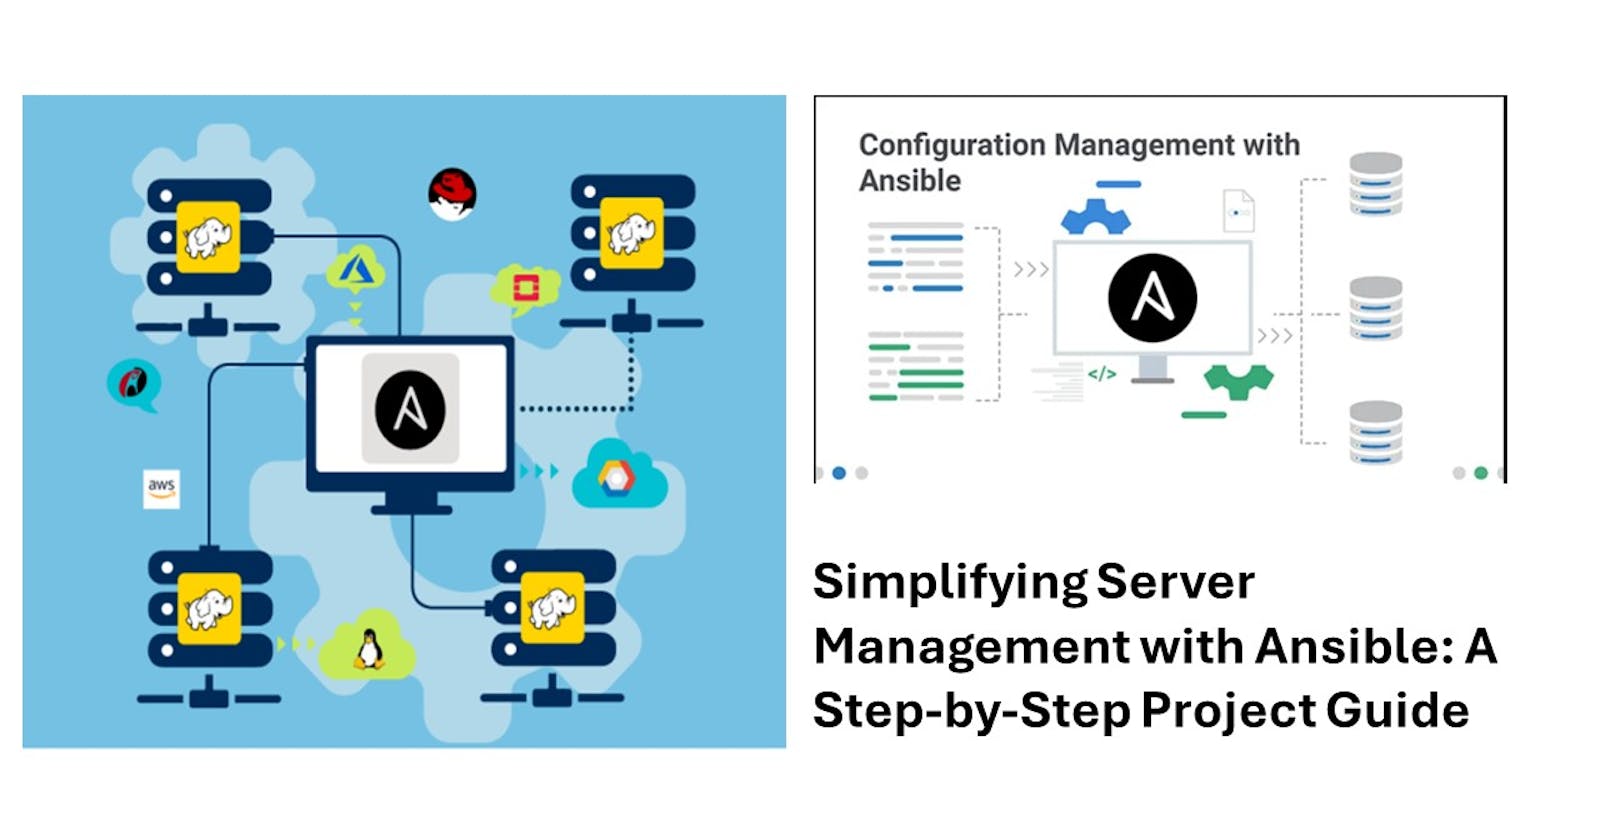 Simplifying Server Management with Ansible: A Step-by-Step Project Guide